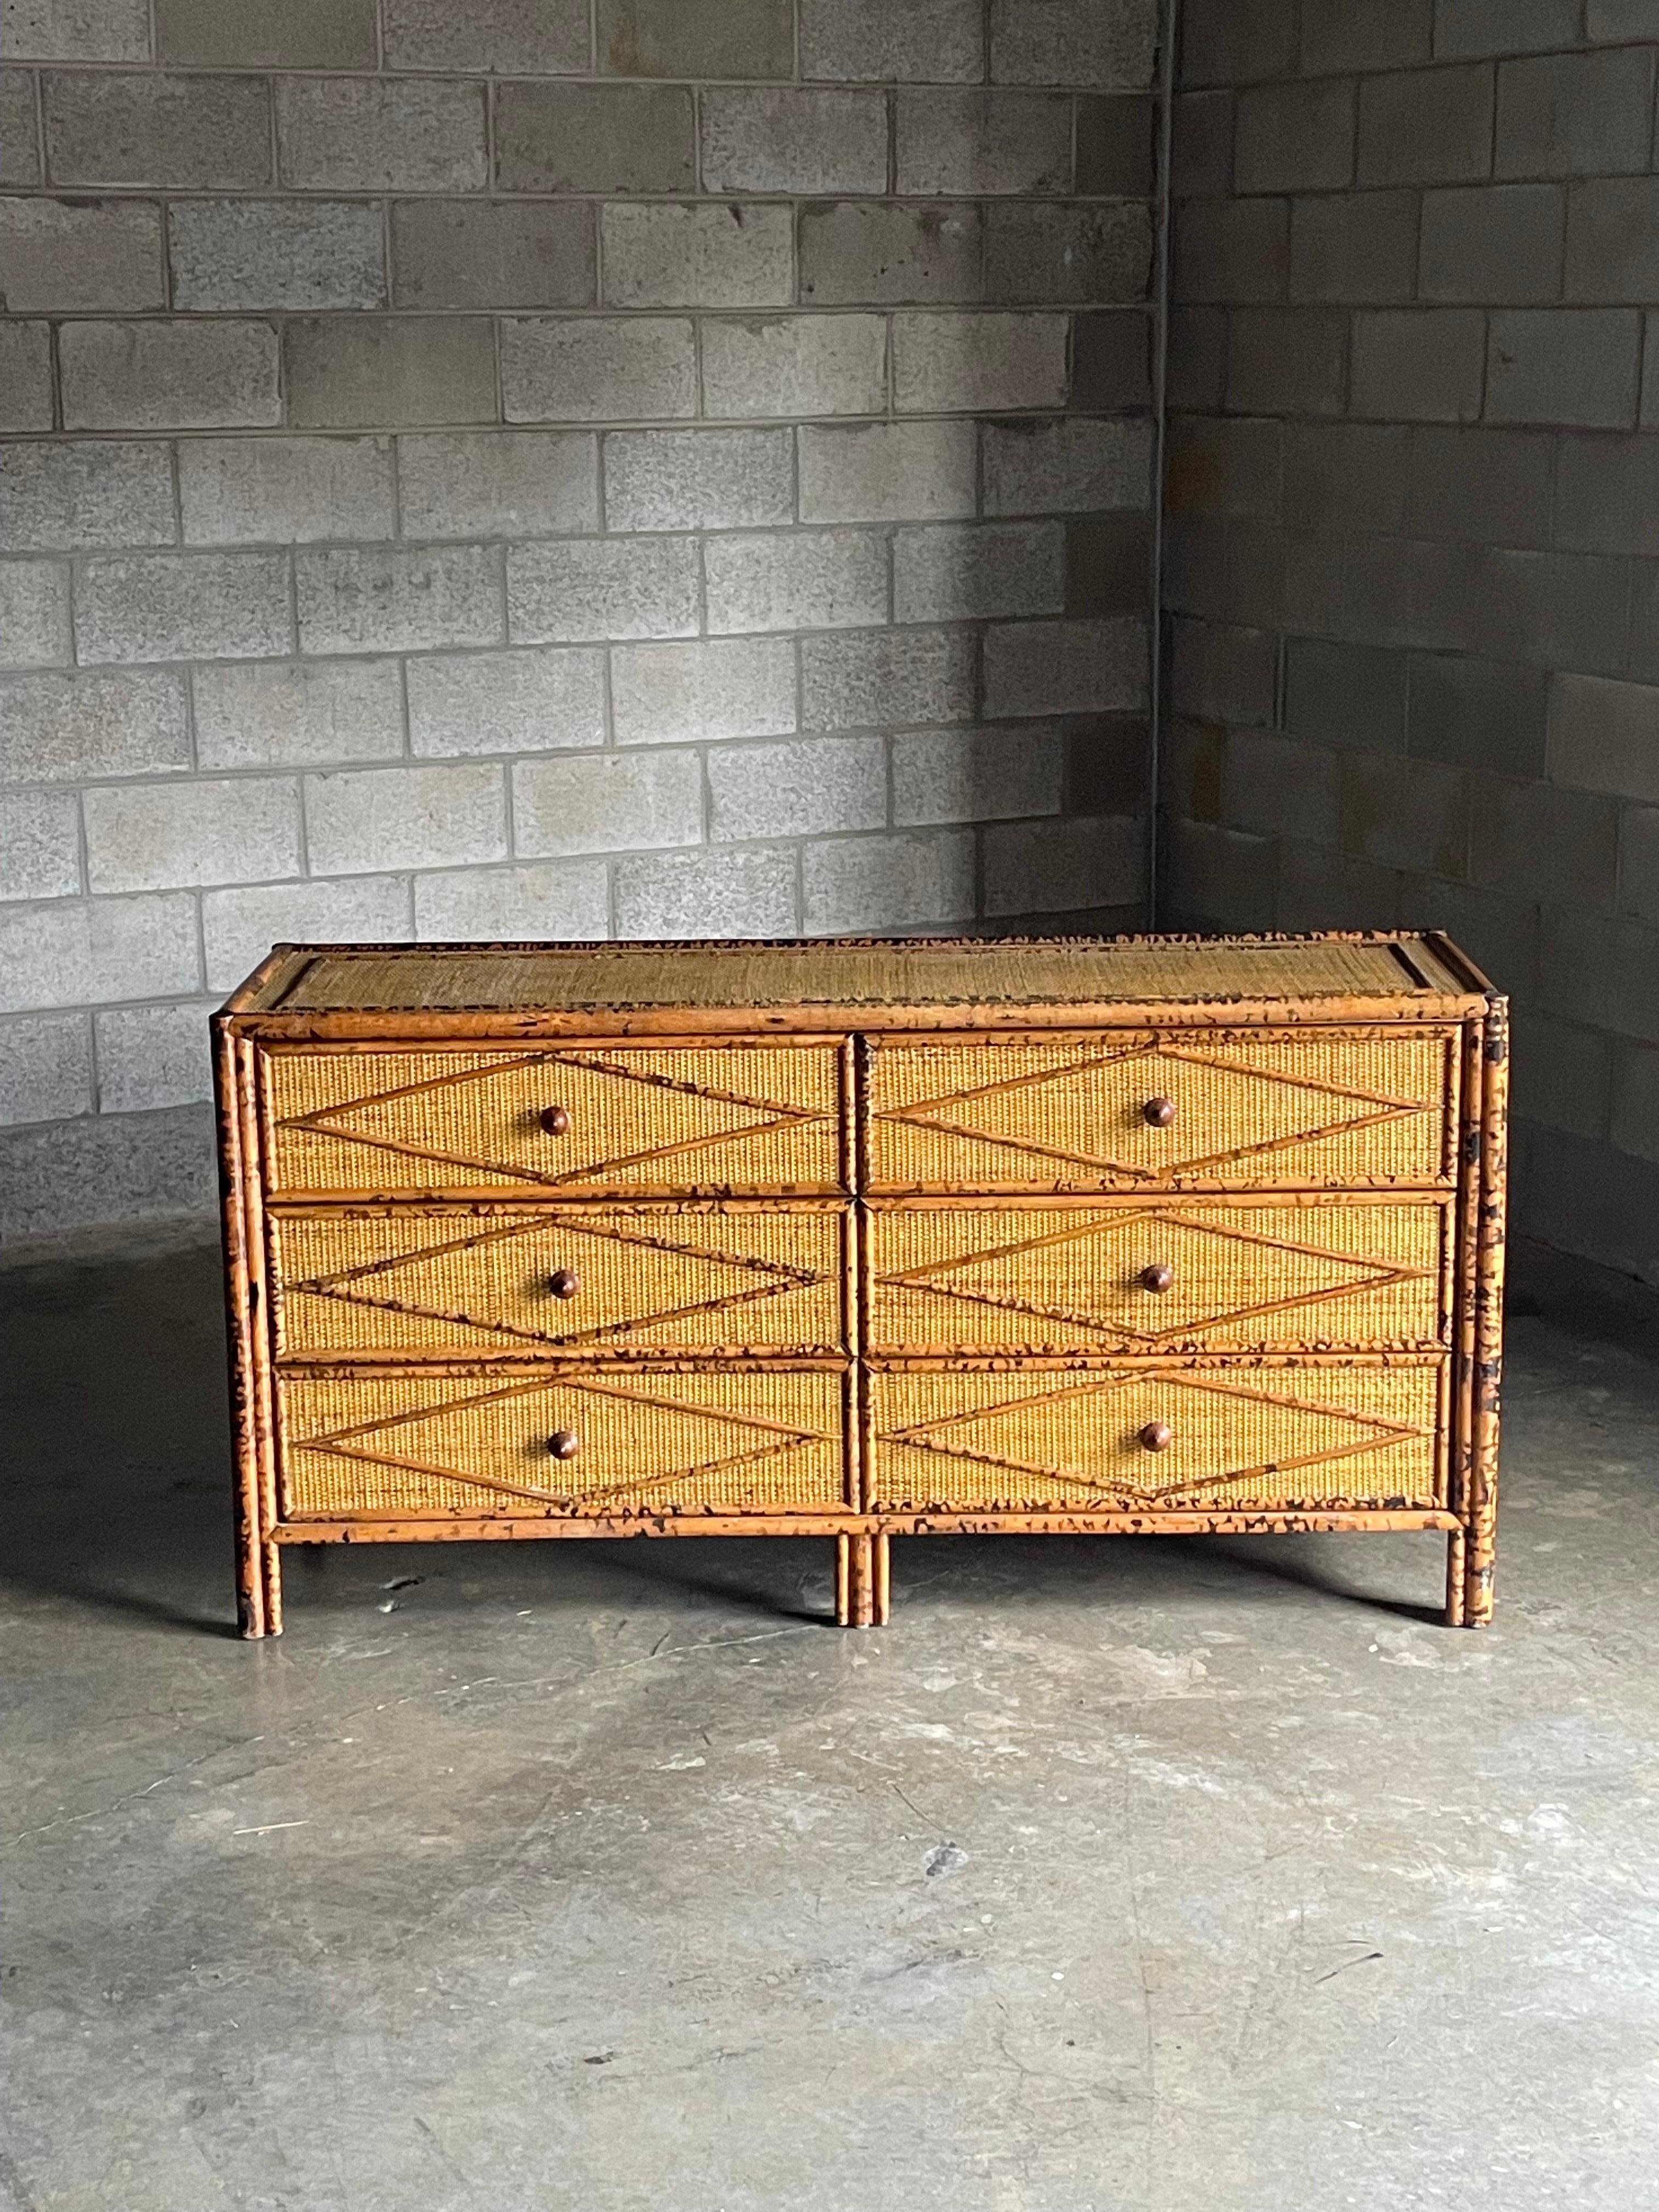 Vintage British colonial style dresser in faux burnt bamboo and rattan. Six spacious drawers clad in rattan with a bamboo skeleton. Wonderful diamond pattern throughout. Sold through Bloomingdales in the 1990s and attributed to Ralph Lauren, this